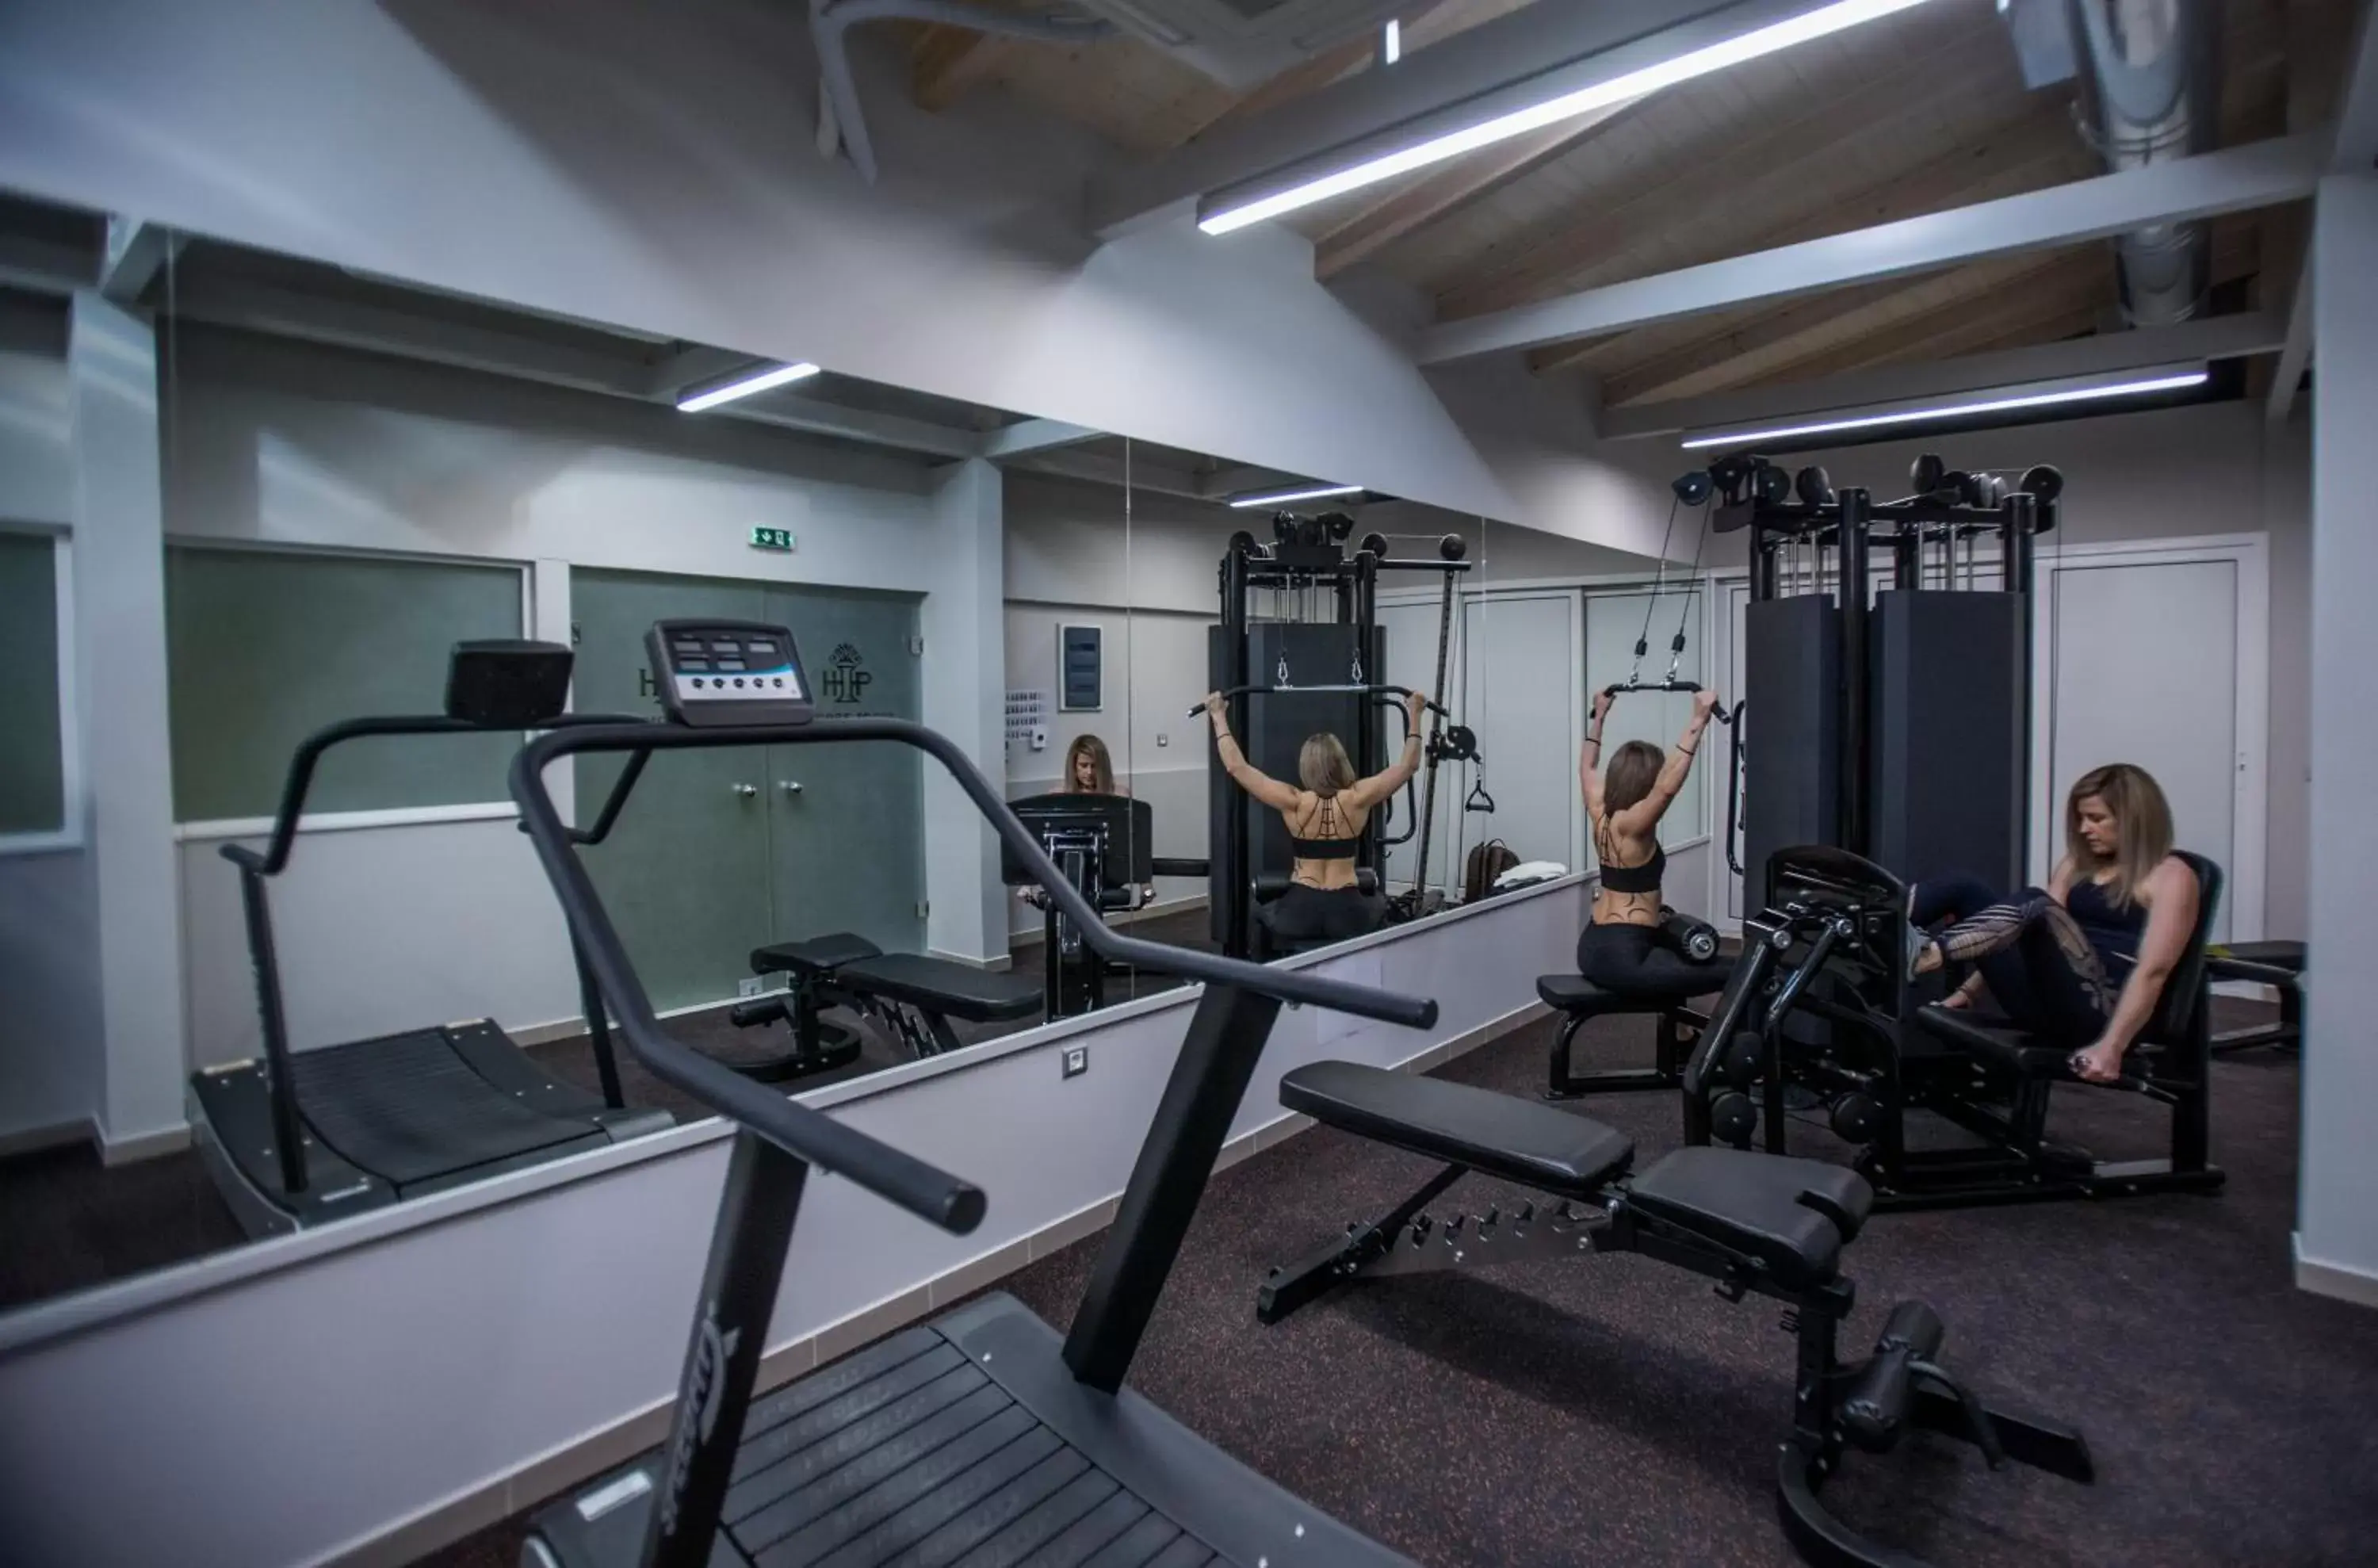 Fitness centre/facilities, Fitness Center/Facilities in Ionian Plaza Hotel